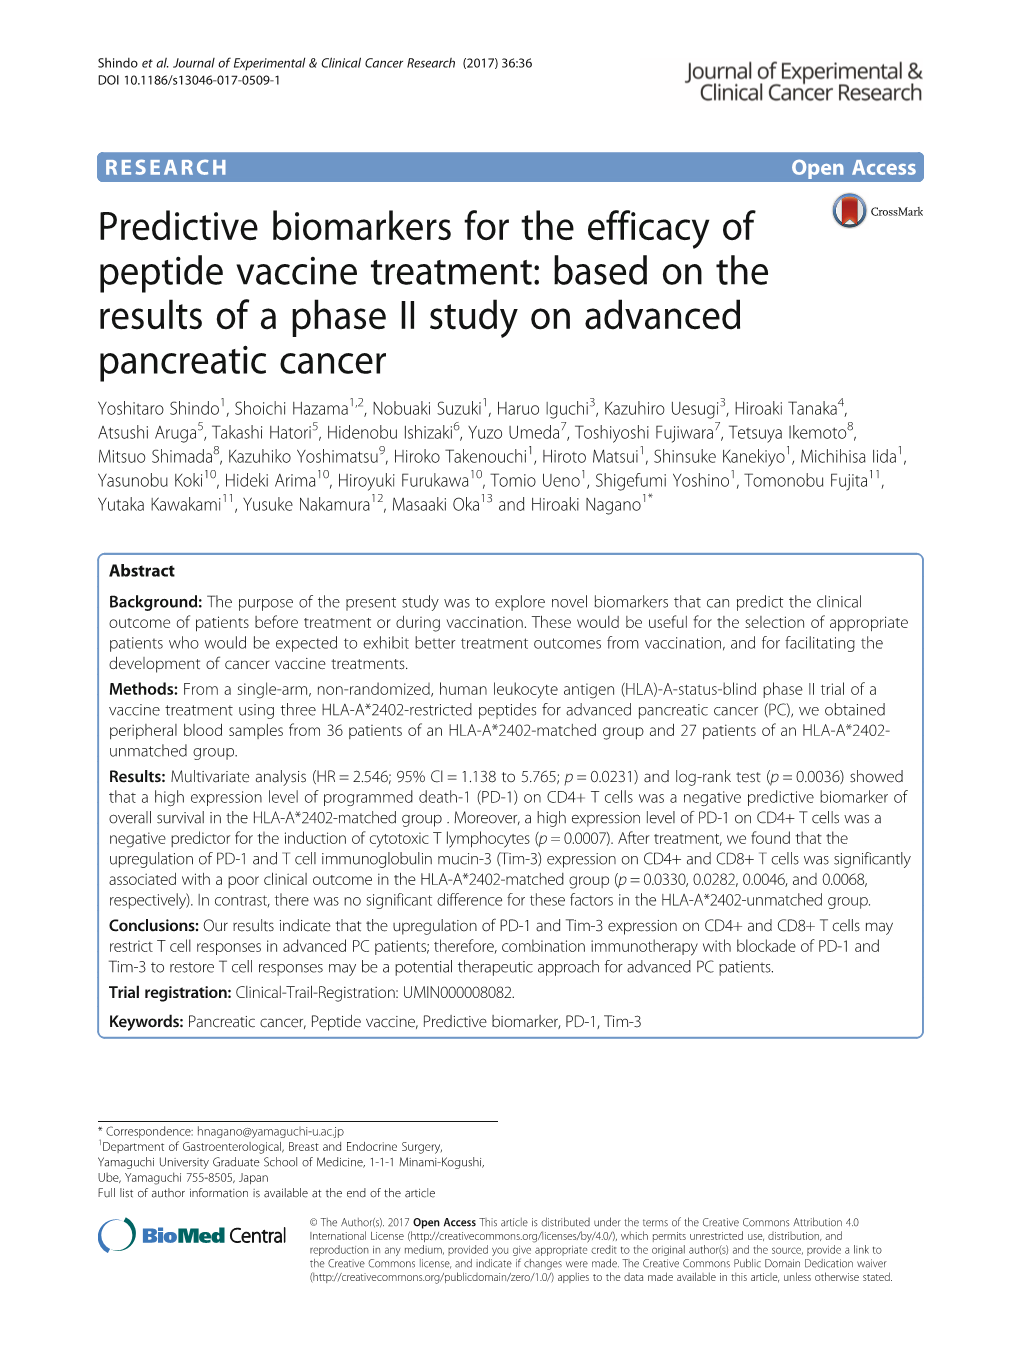 Predictive Biomarkers for the Efficacy of Peptide Vaccine Treatment